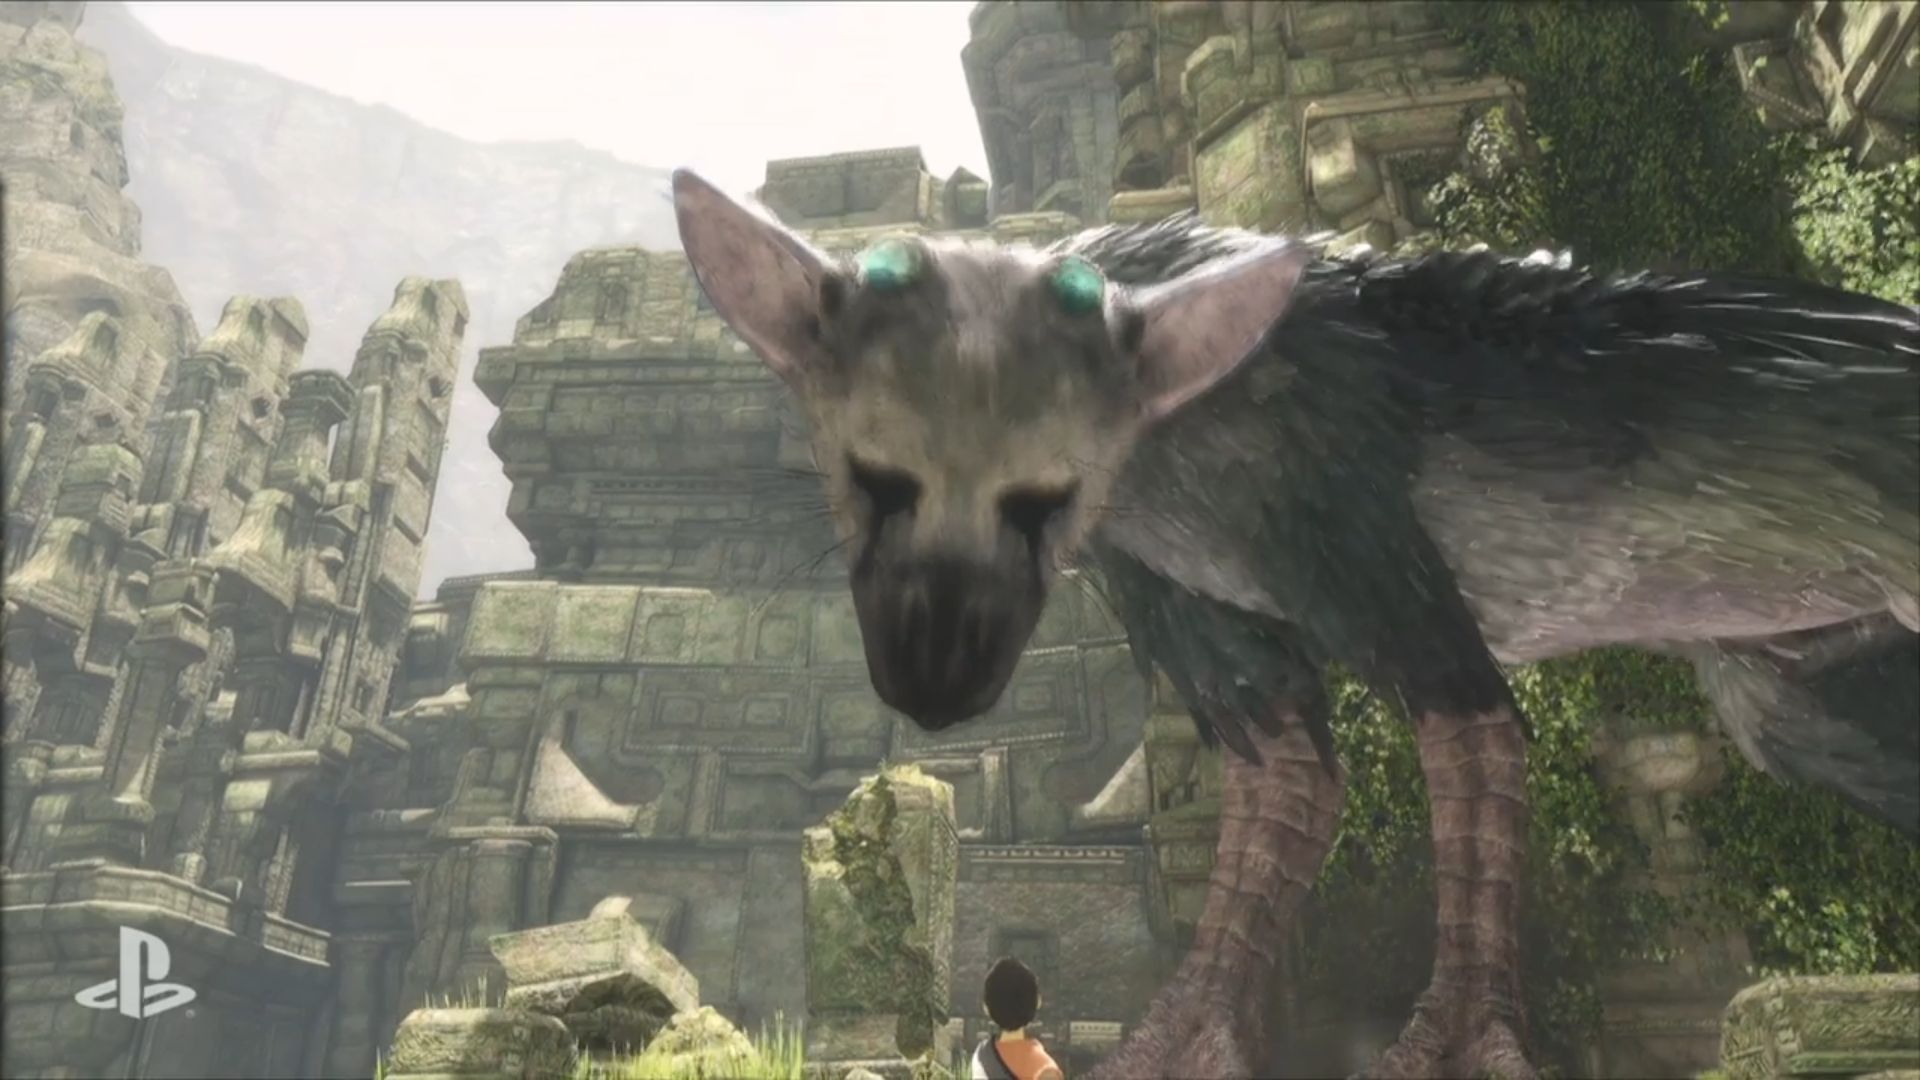 The Last Guardian for PlayStation 4